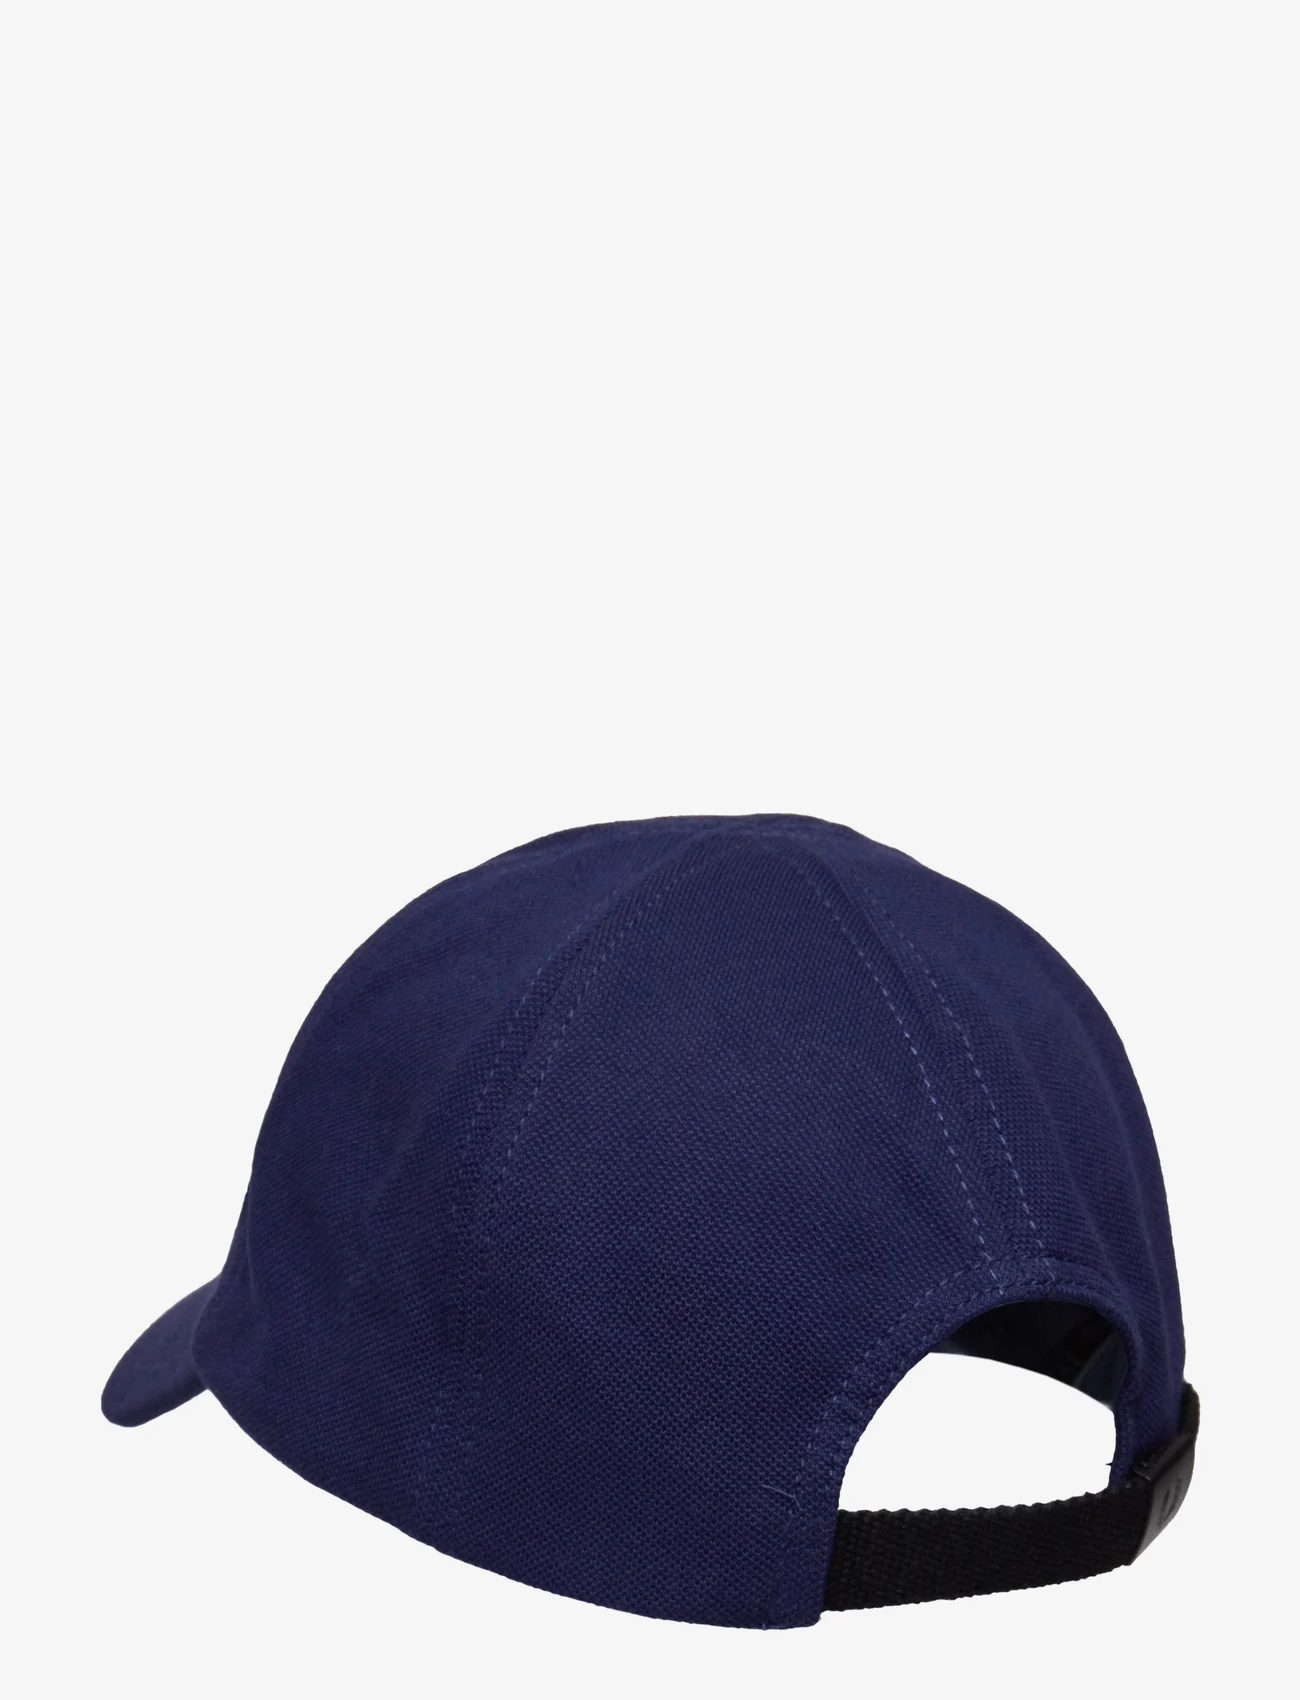 Fred Perry - PIQUE CLASSIC CAP - kepurės su snapeliu - french navy - 1